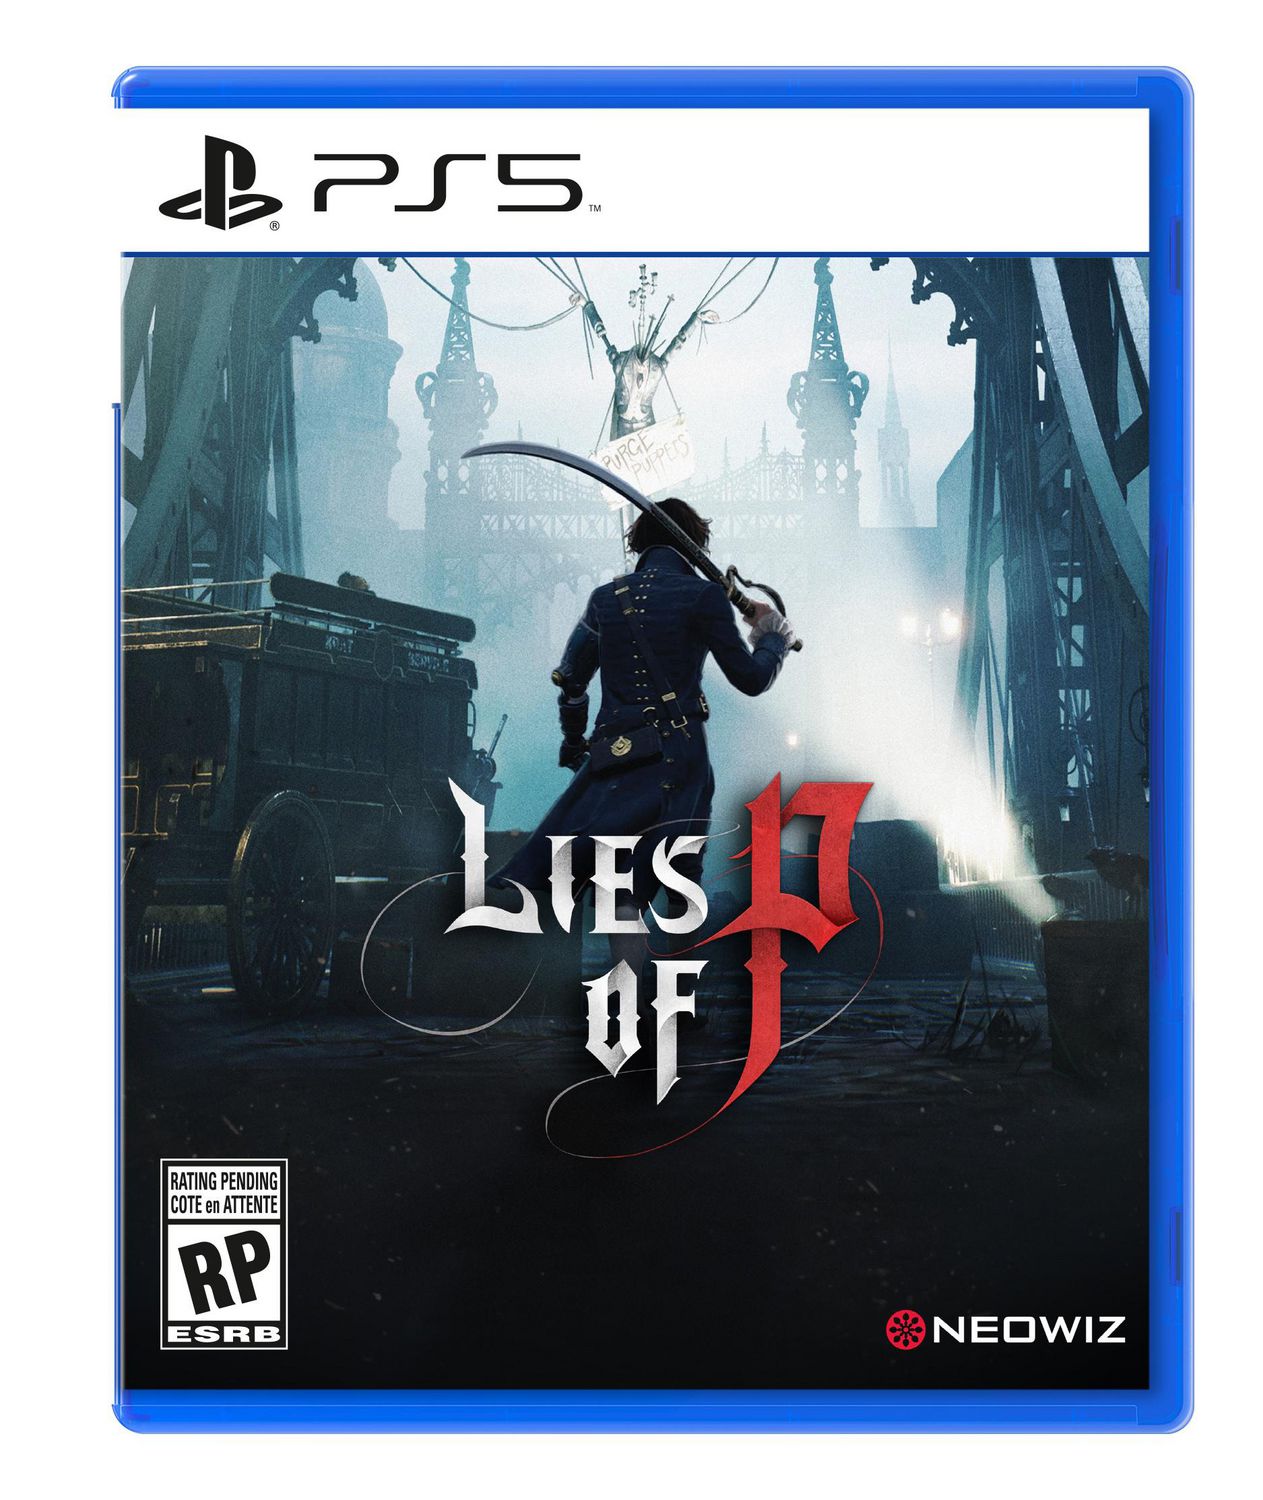 Lords Of The Fallen - Jeu PS5 - Deluxe Edition - Cdiscount Jeux vidéo